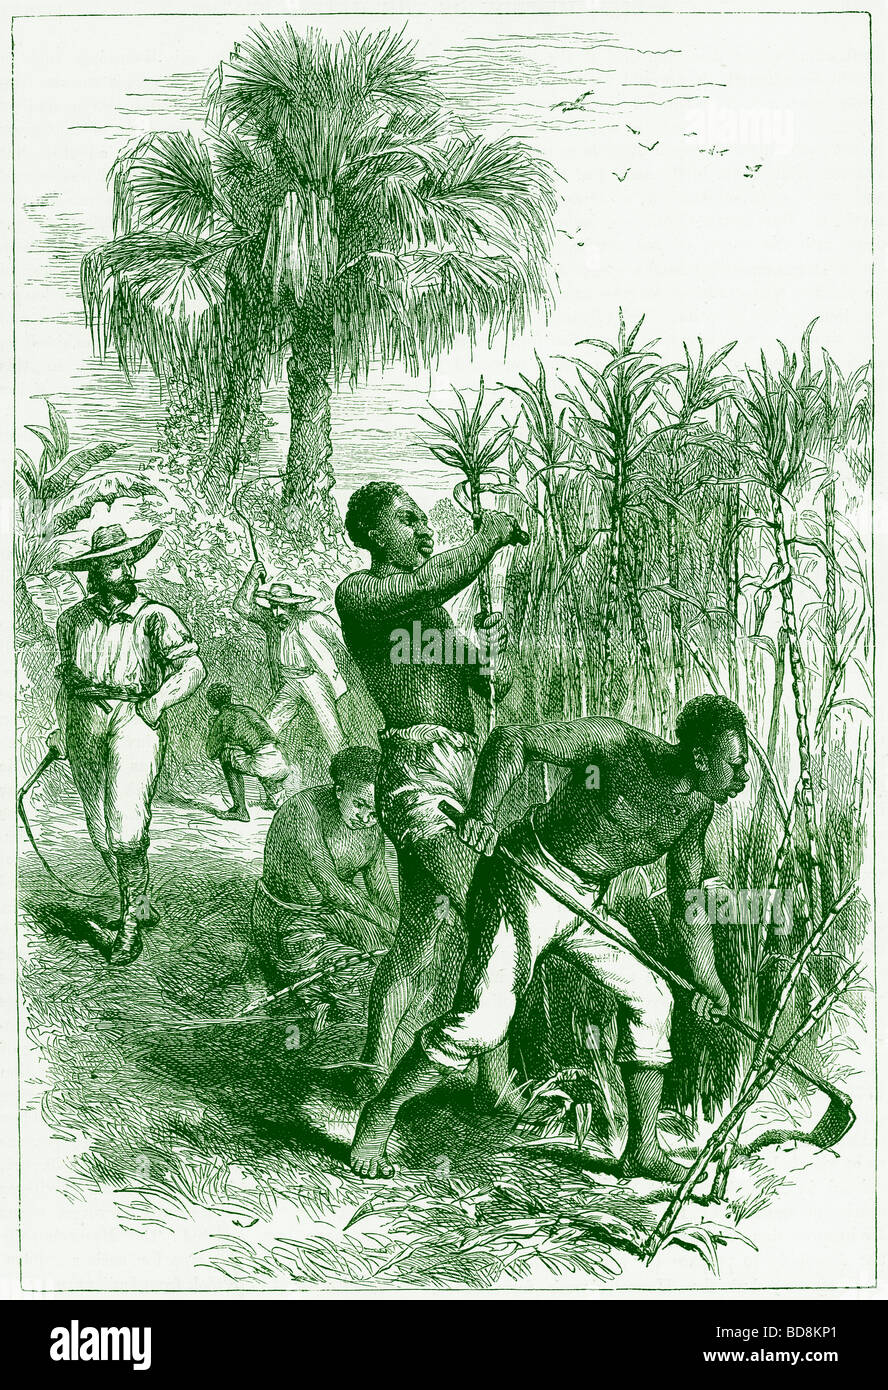 Slaves working on a plantation Illustration from Cassell s History of the United States by Edward Ollier c 1900 Stock Photo